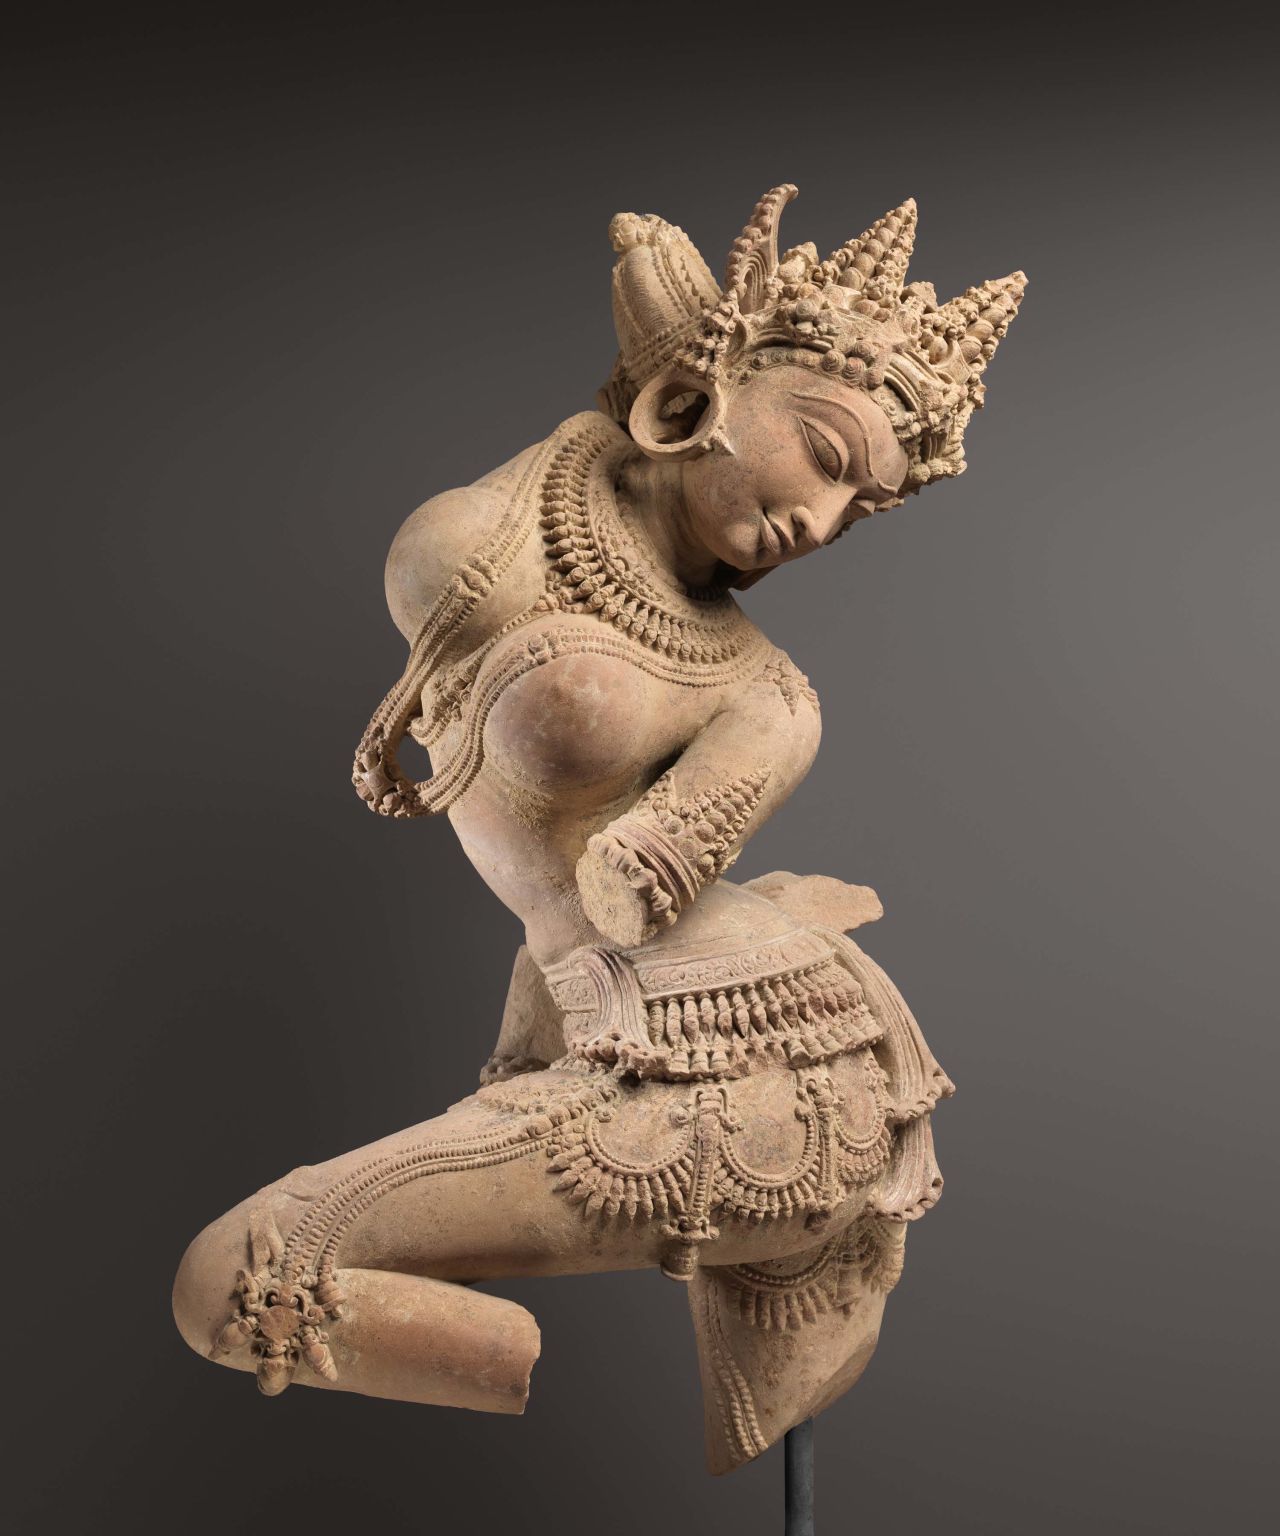 "Celestial dancer (Devata)," an 11th-century Indian statue in the Met's collection linked to the convicted antiquities smuggler Subhash Kapoor.